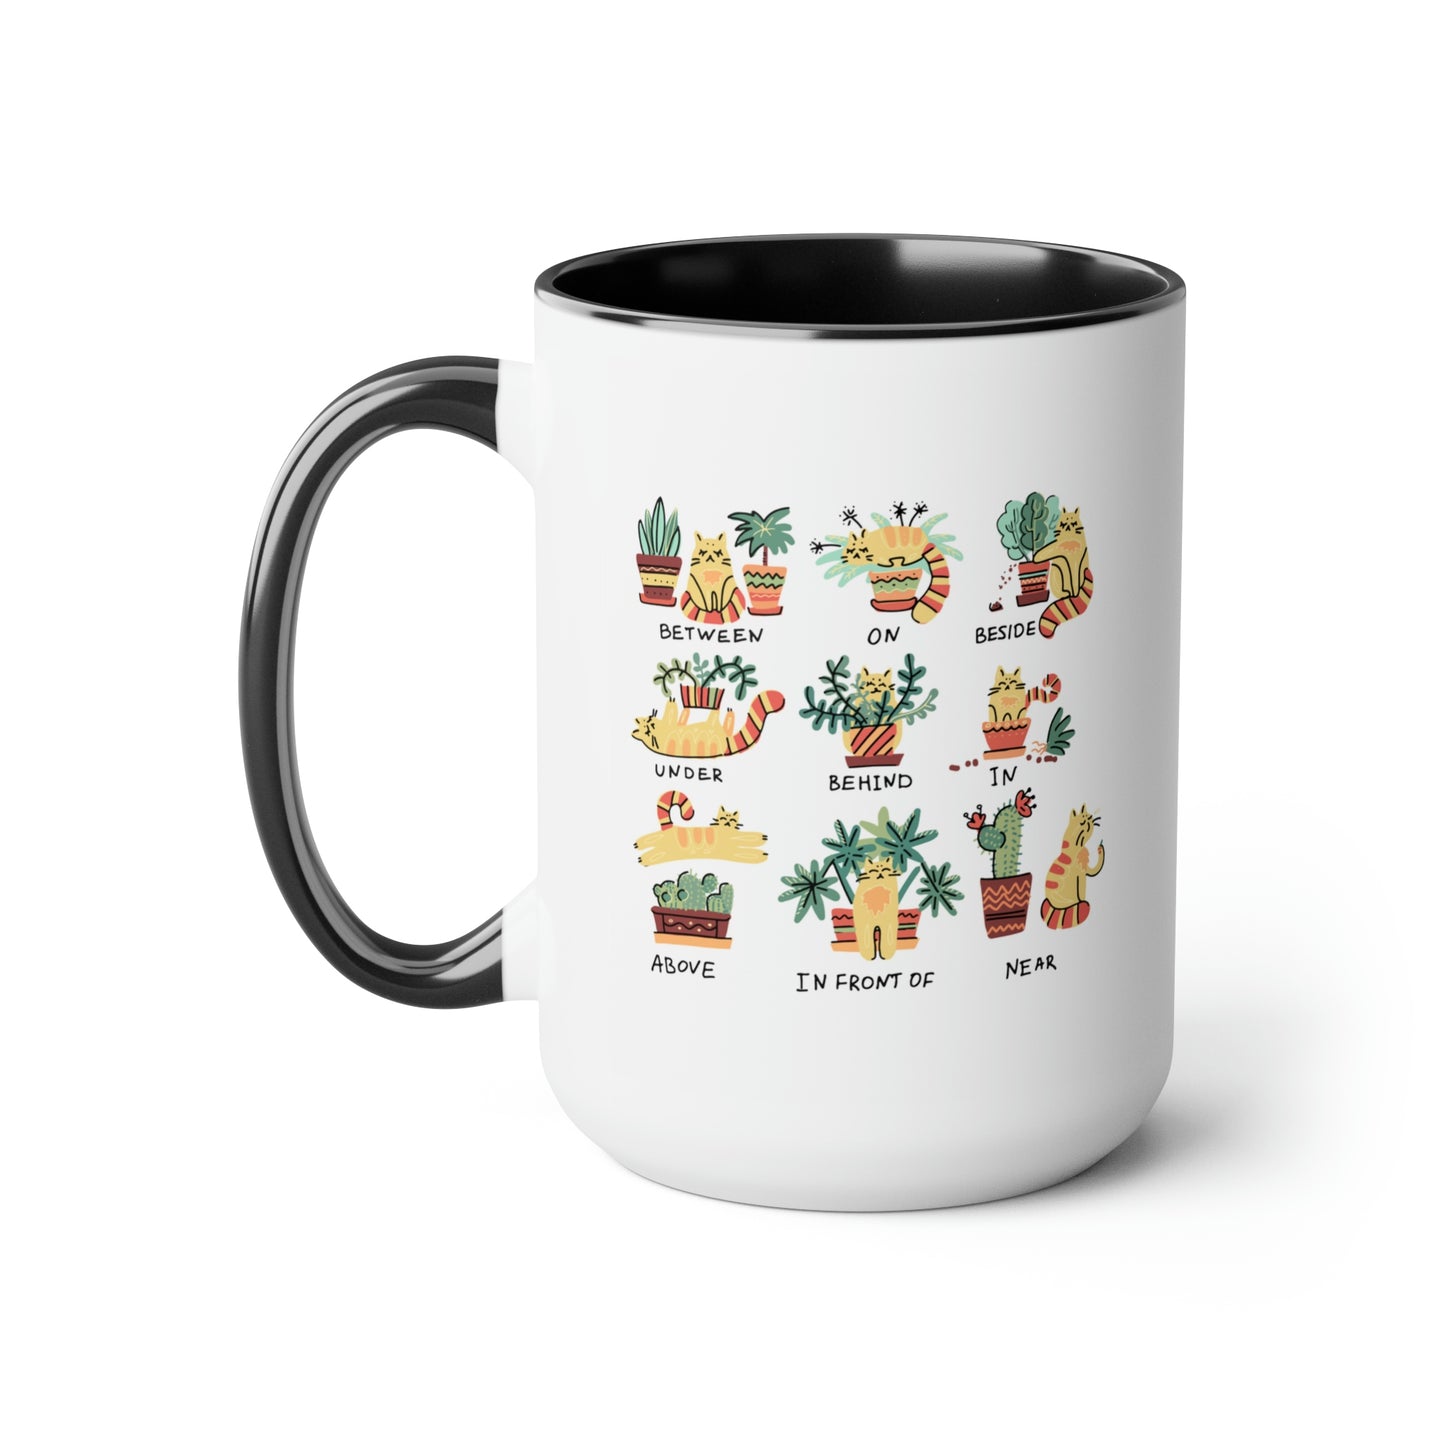 Funny cat Coffee Mugs, 15oz for cat lovers. Cats, plants and coffee. Plants and cats mug.